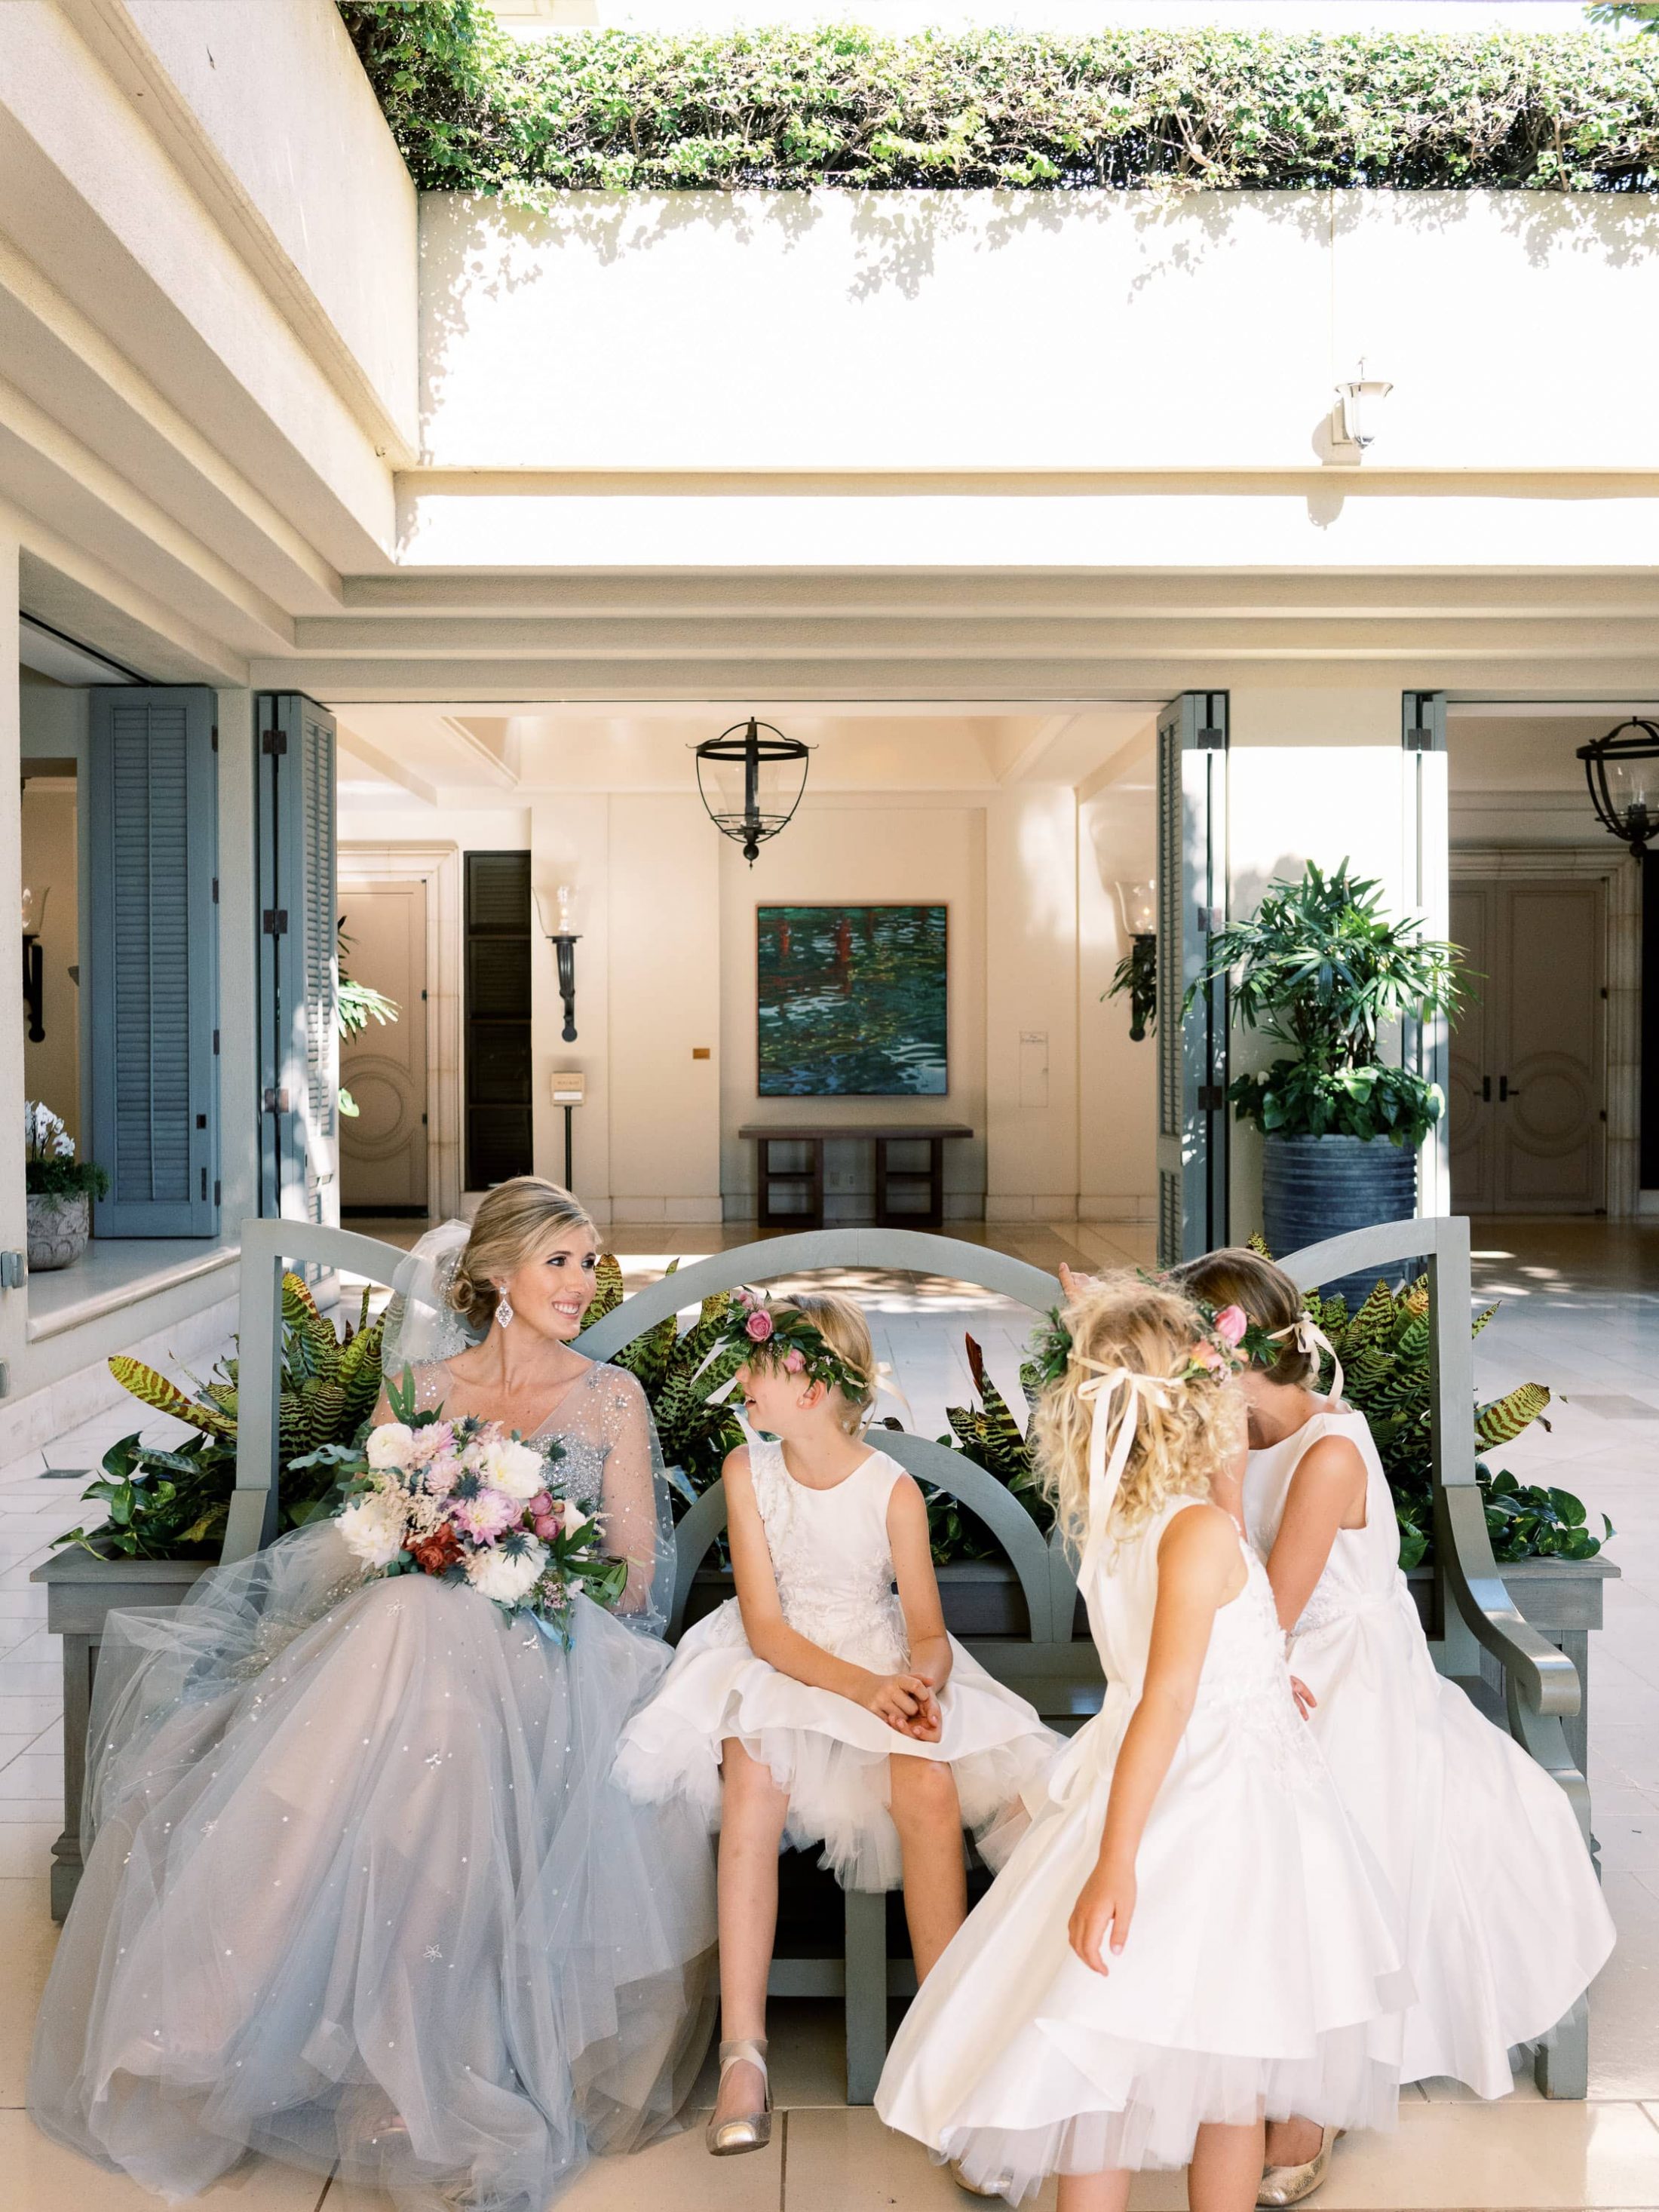 Bride and flower girls at Maui wedding at Four Seasons Resort Maui in Wailea, Hawaii | Photo by James x Schulze